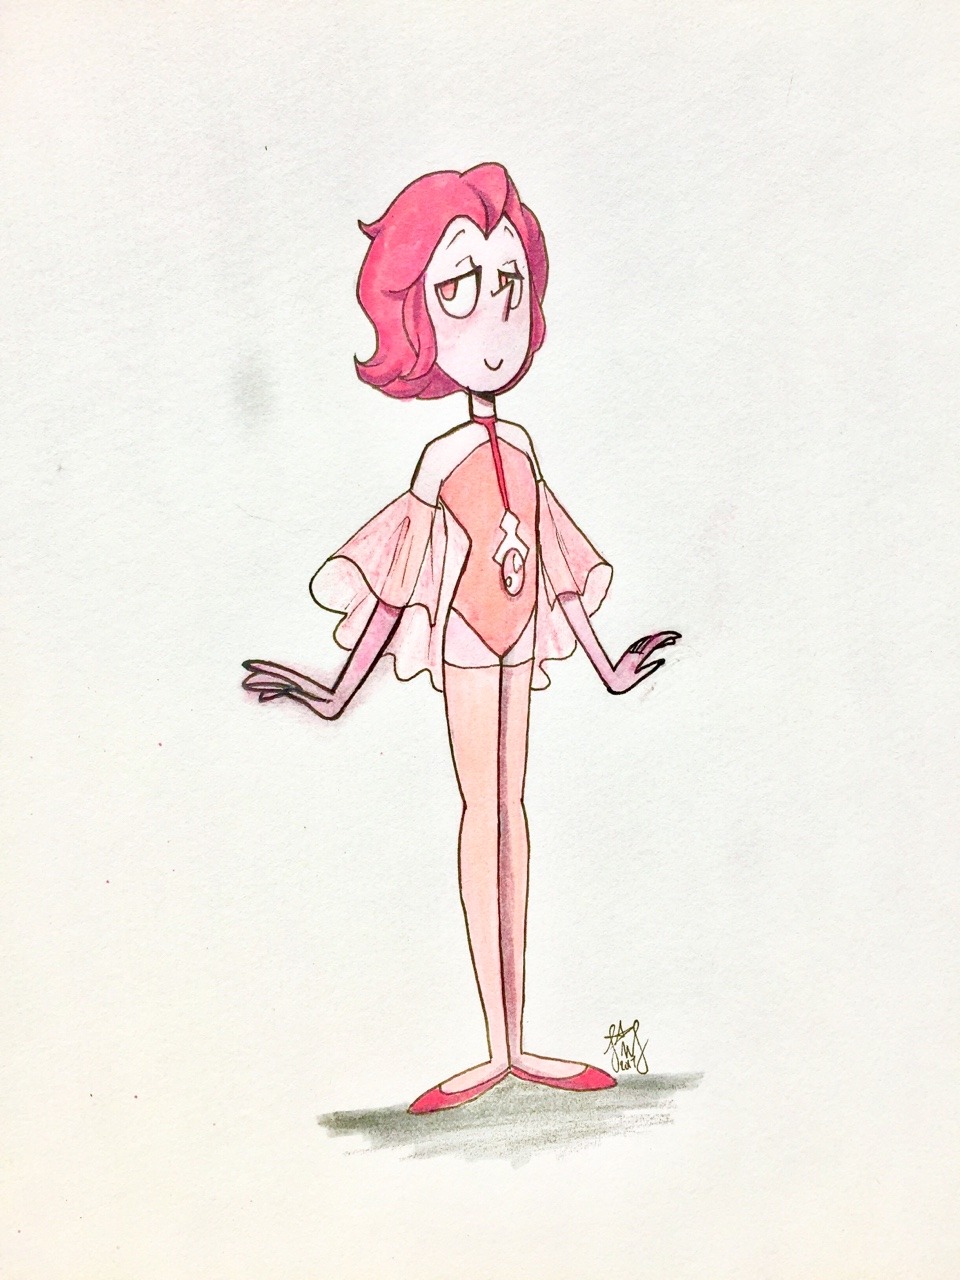 This is how I imagine pink pearl would look like. What do you think? 🙃